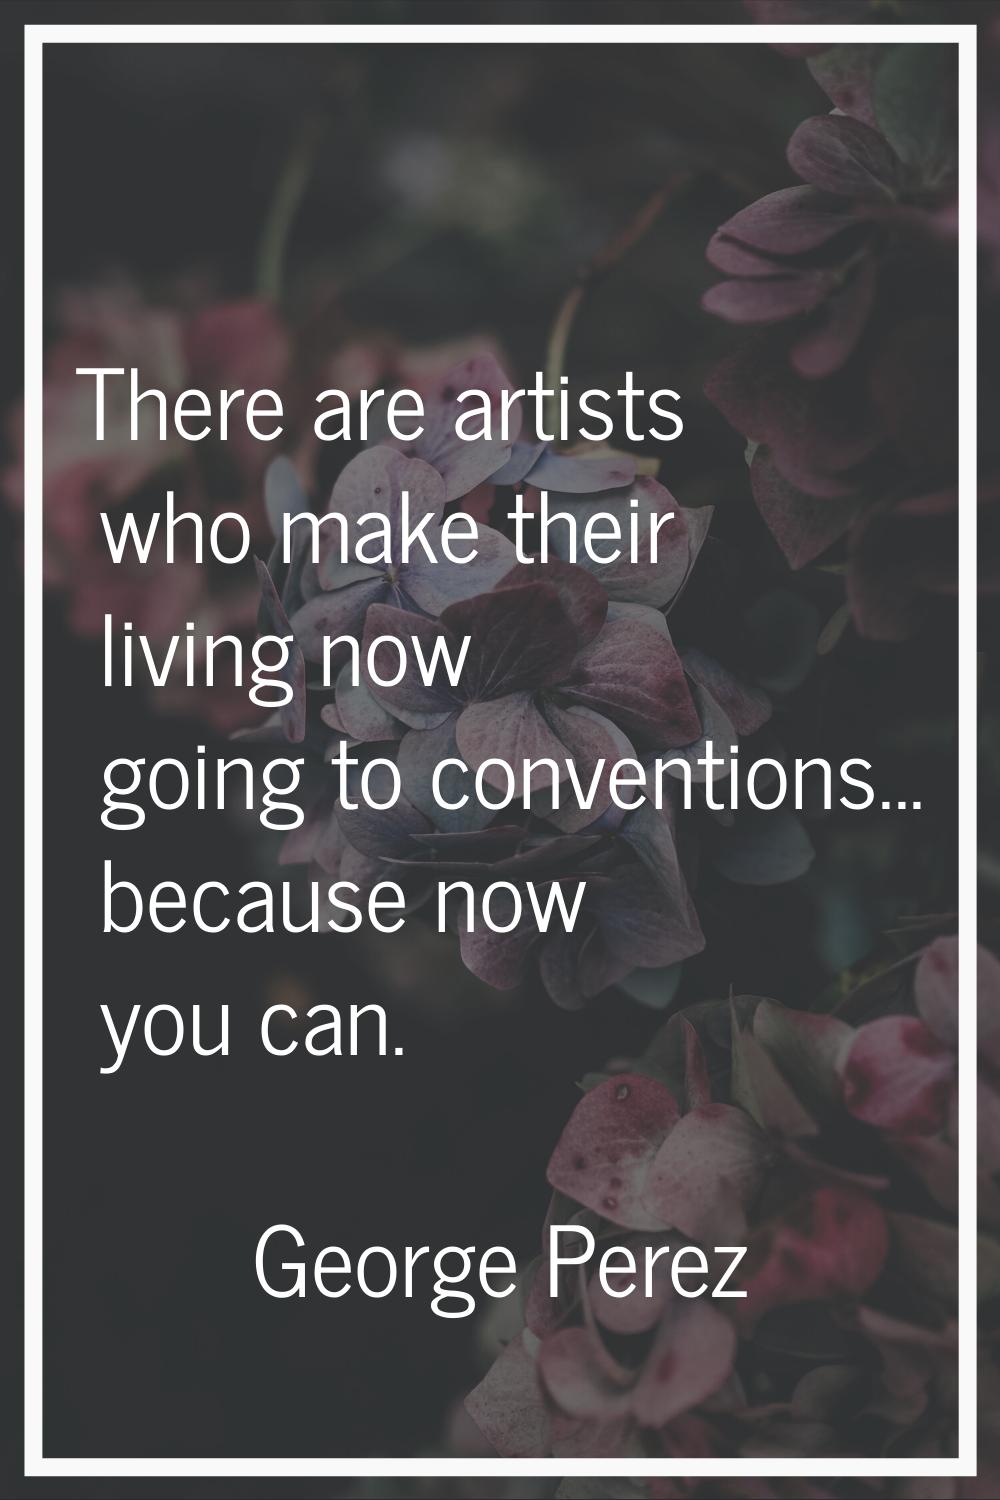 There are artists who make their living now going to conventions... because now you can.